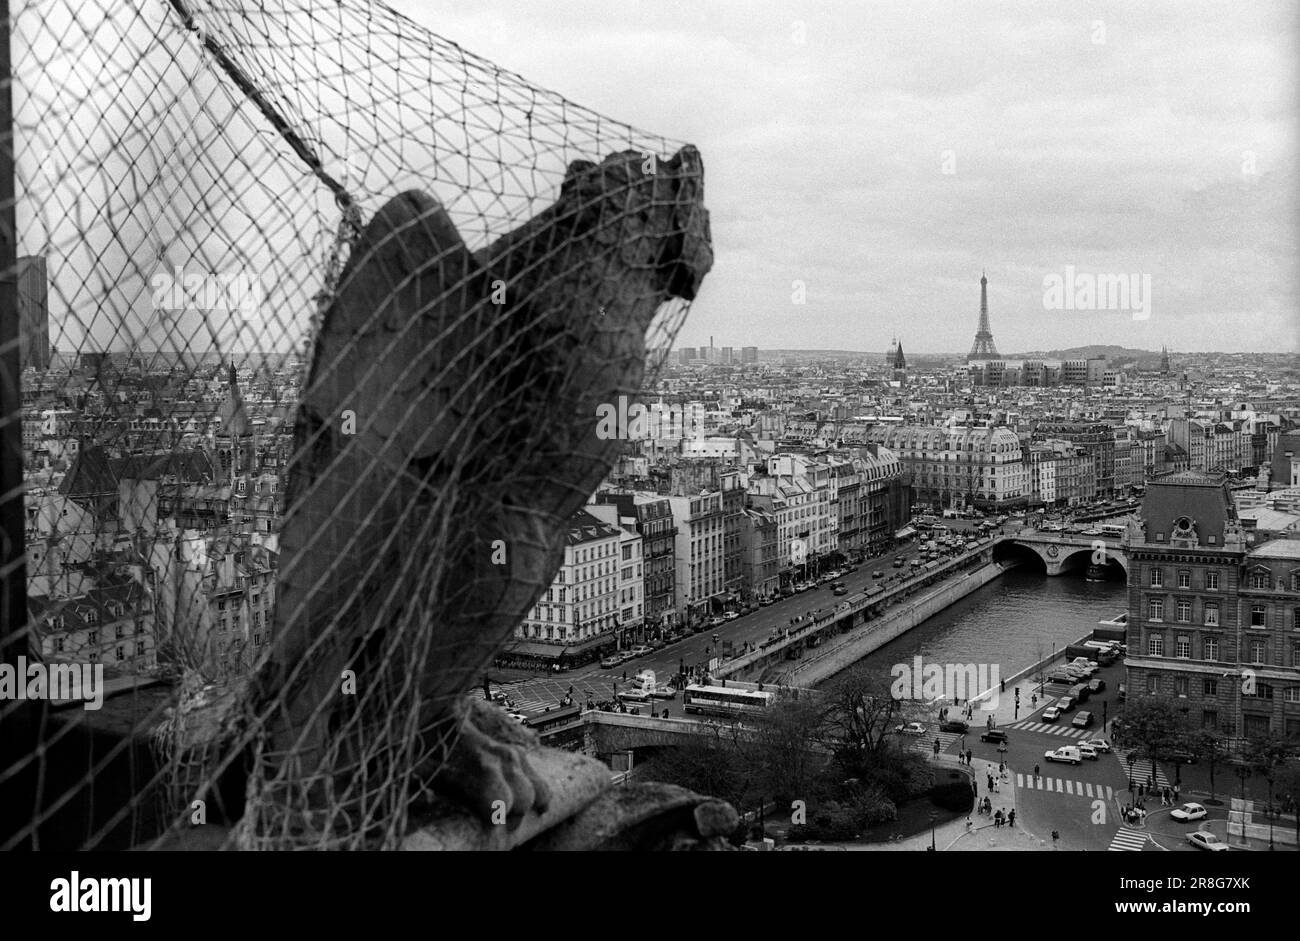 France, Paris, 24.03.1990, mythical creatures on the towers of Notre-Dame Stock Photo